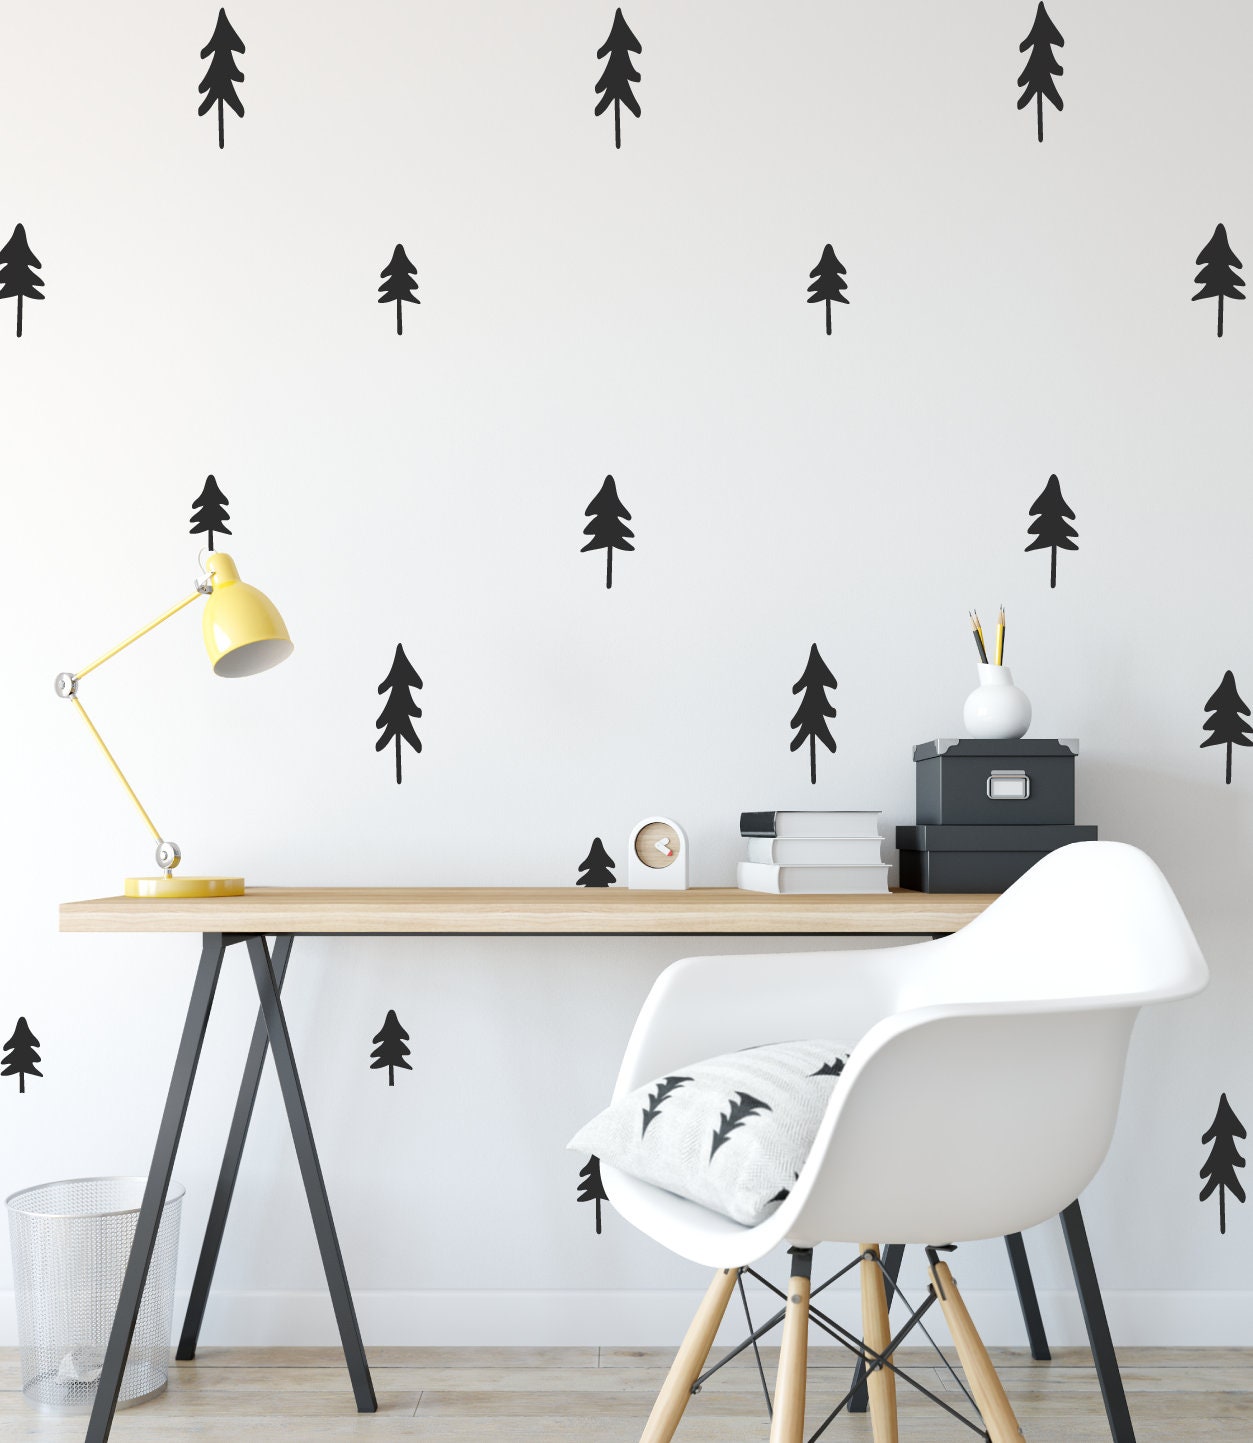 36 Pine Tree Wall Stickers, Wall Decal Pattern, Tree Wall Decals, Tree Wall Stickers, Scandinavian Decals, Scandinavian Stickers